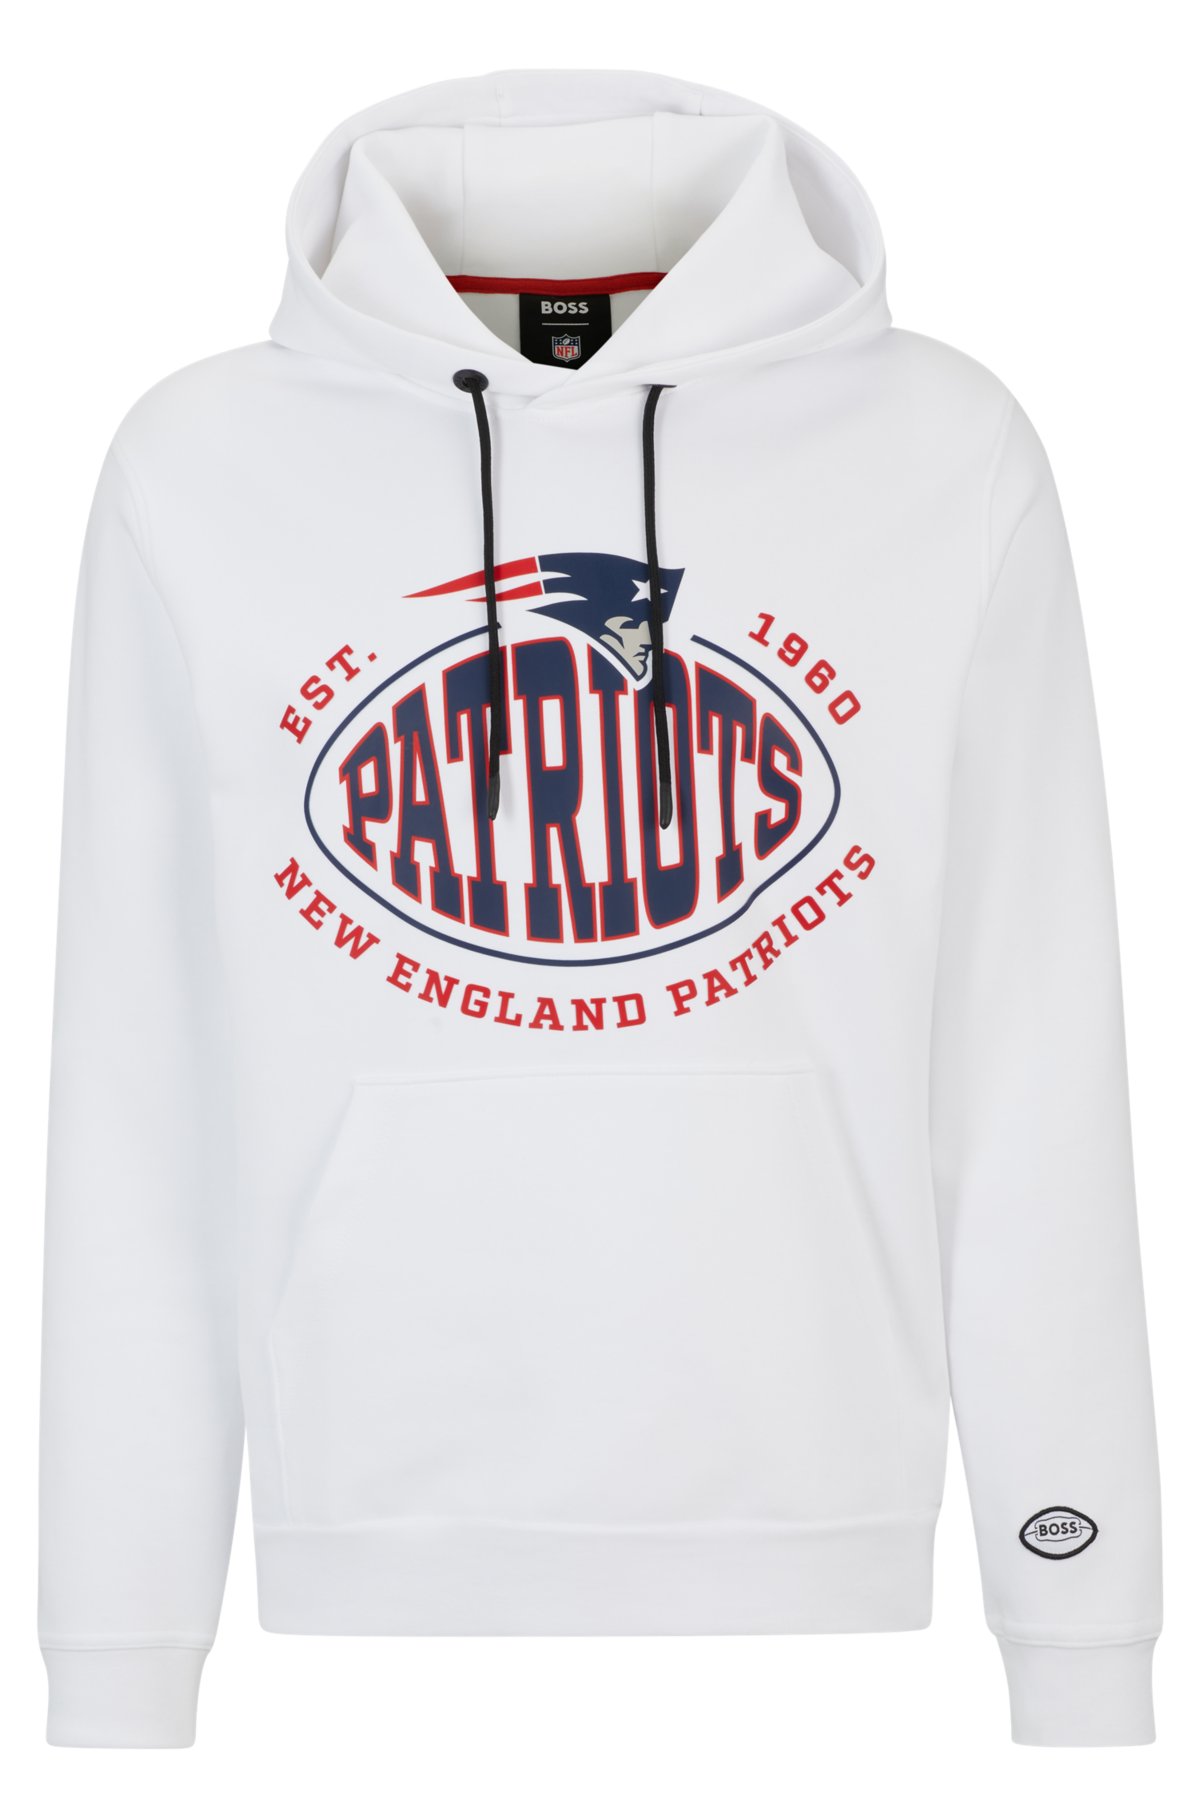 Boss x NFL Cotton-Blend Hoodie with Collaborative branding- Patriots | Men's Tracksuits Size XL